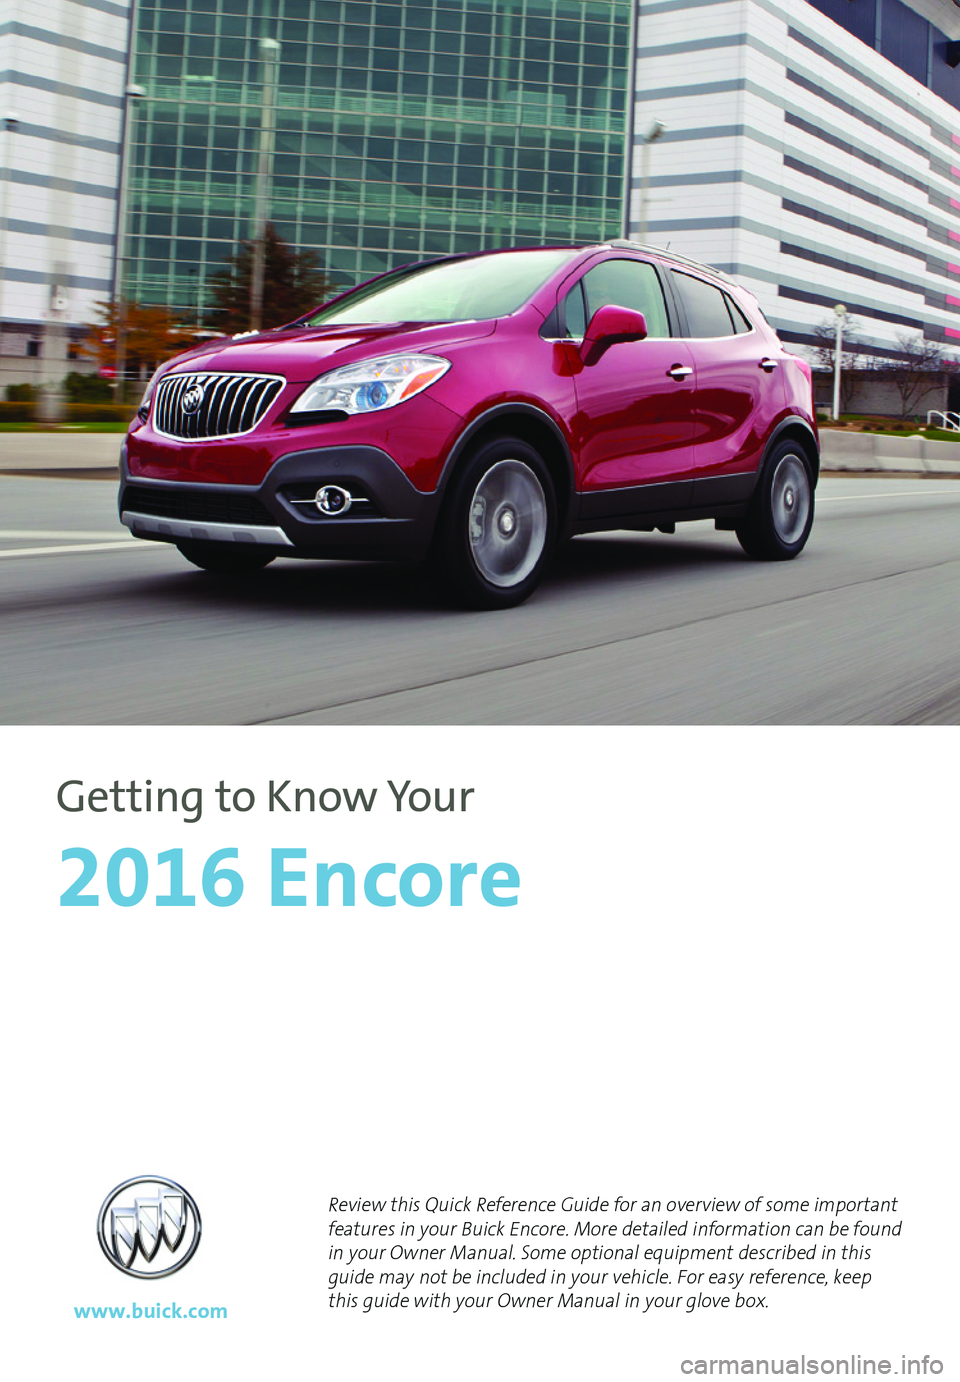 BUICK ENCORE 2016  Get To Know Guide 1
Review this Quick Reference Guide for an overview of some important features in your Buick Encore. More detailed information can be found in your Owner Manual. Some optional equipment described in t